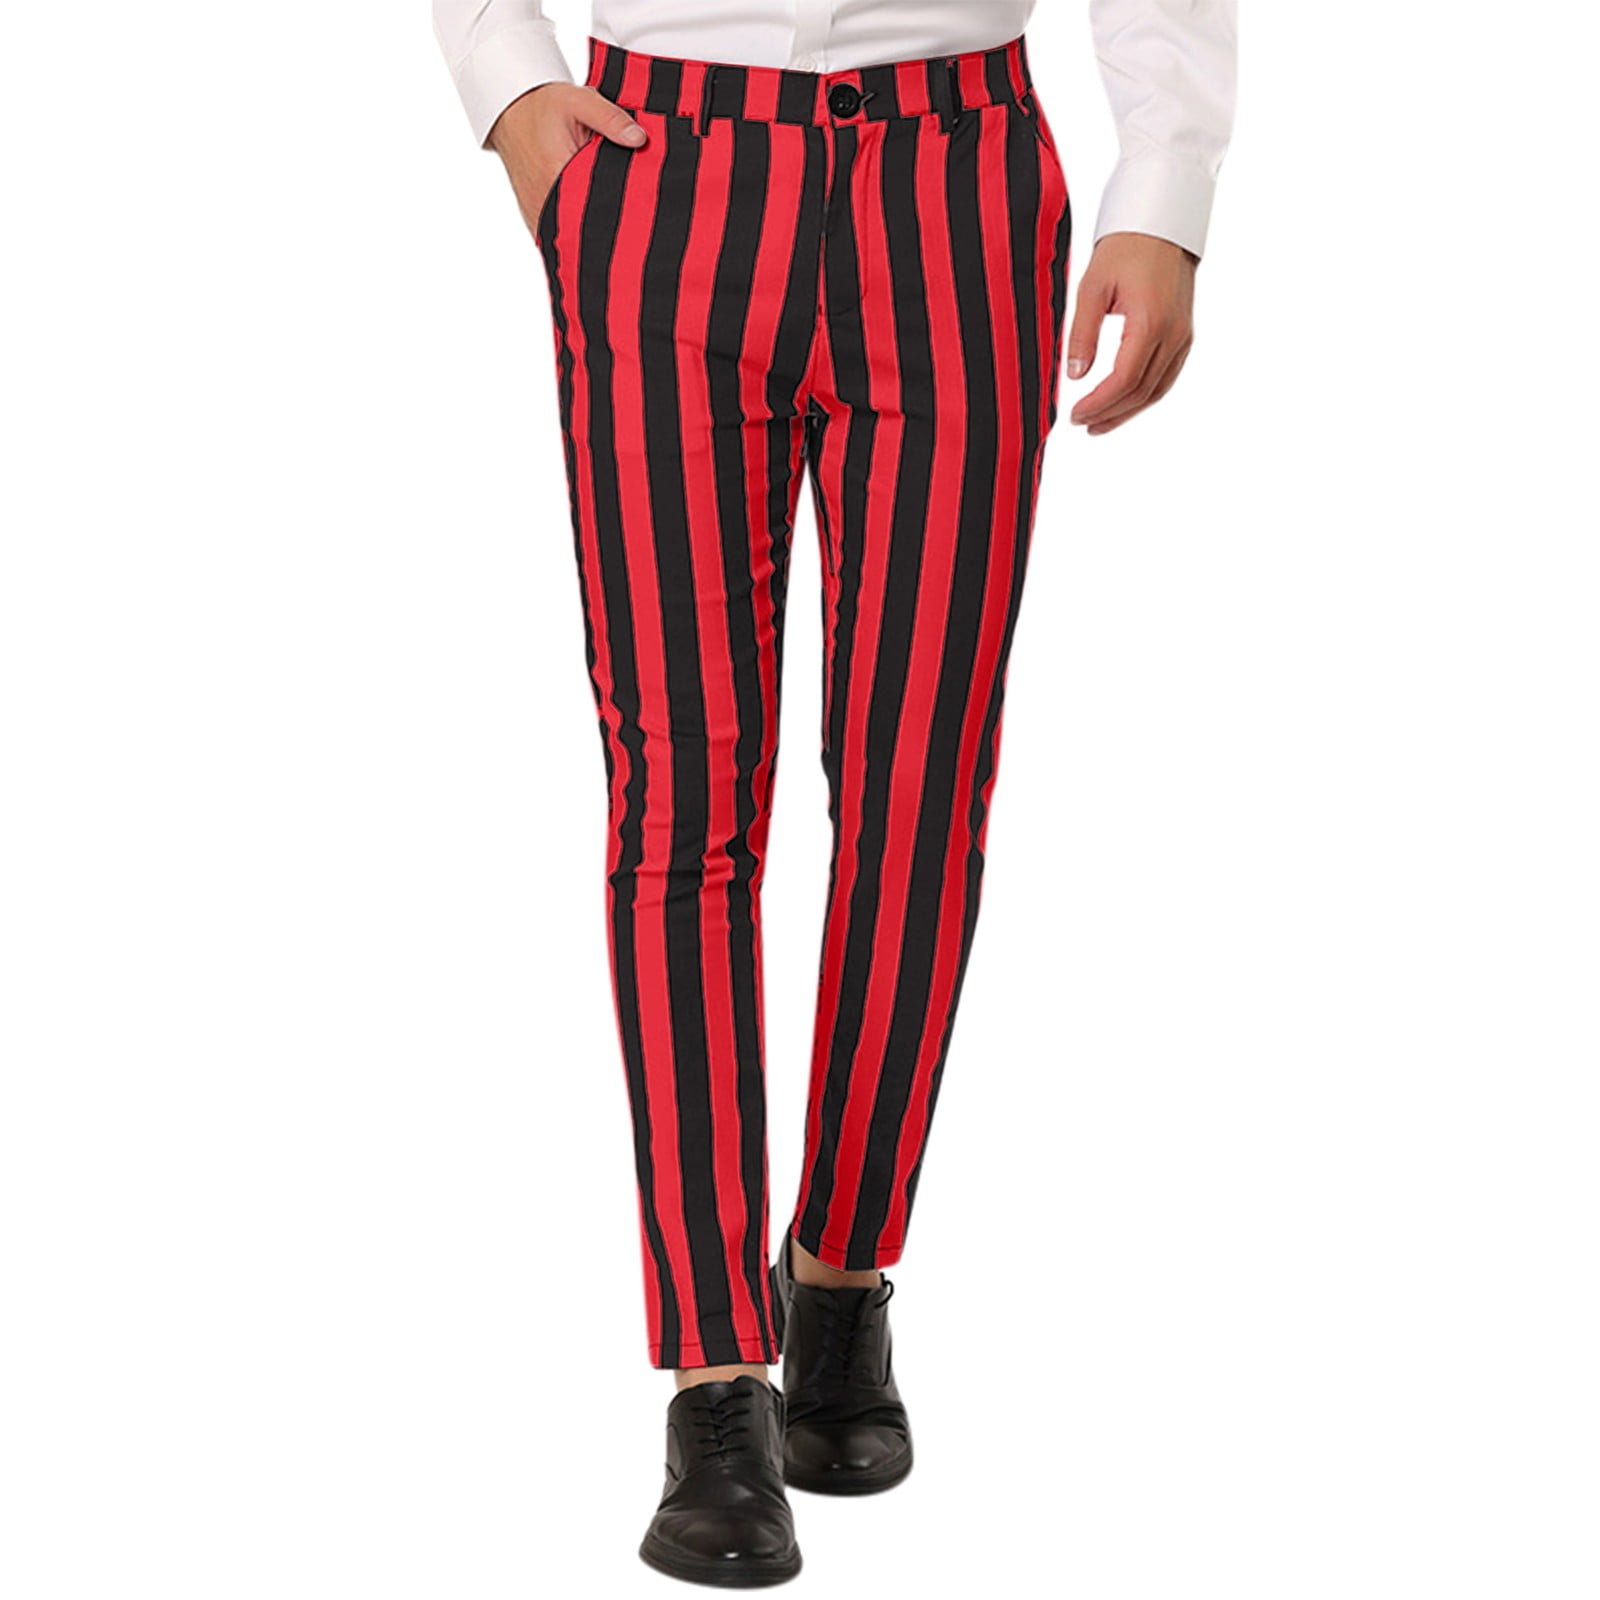 boohoo Cropped Tailored Stripe Trousers | Stripe pants outfit, Casual  striped shirt, Pants outfit men